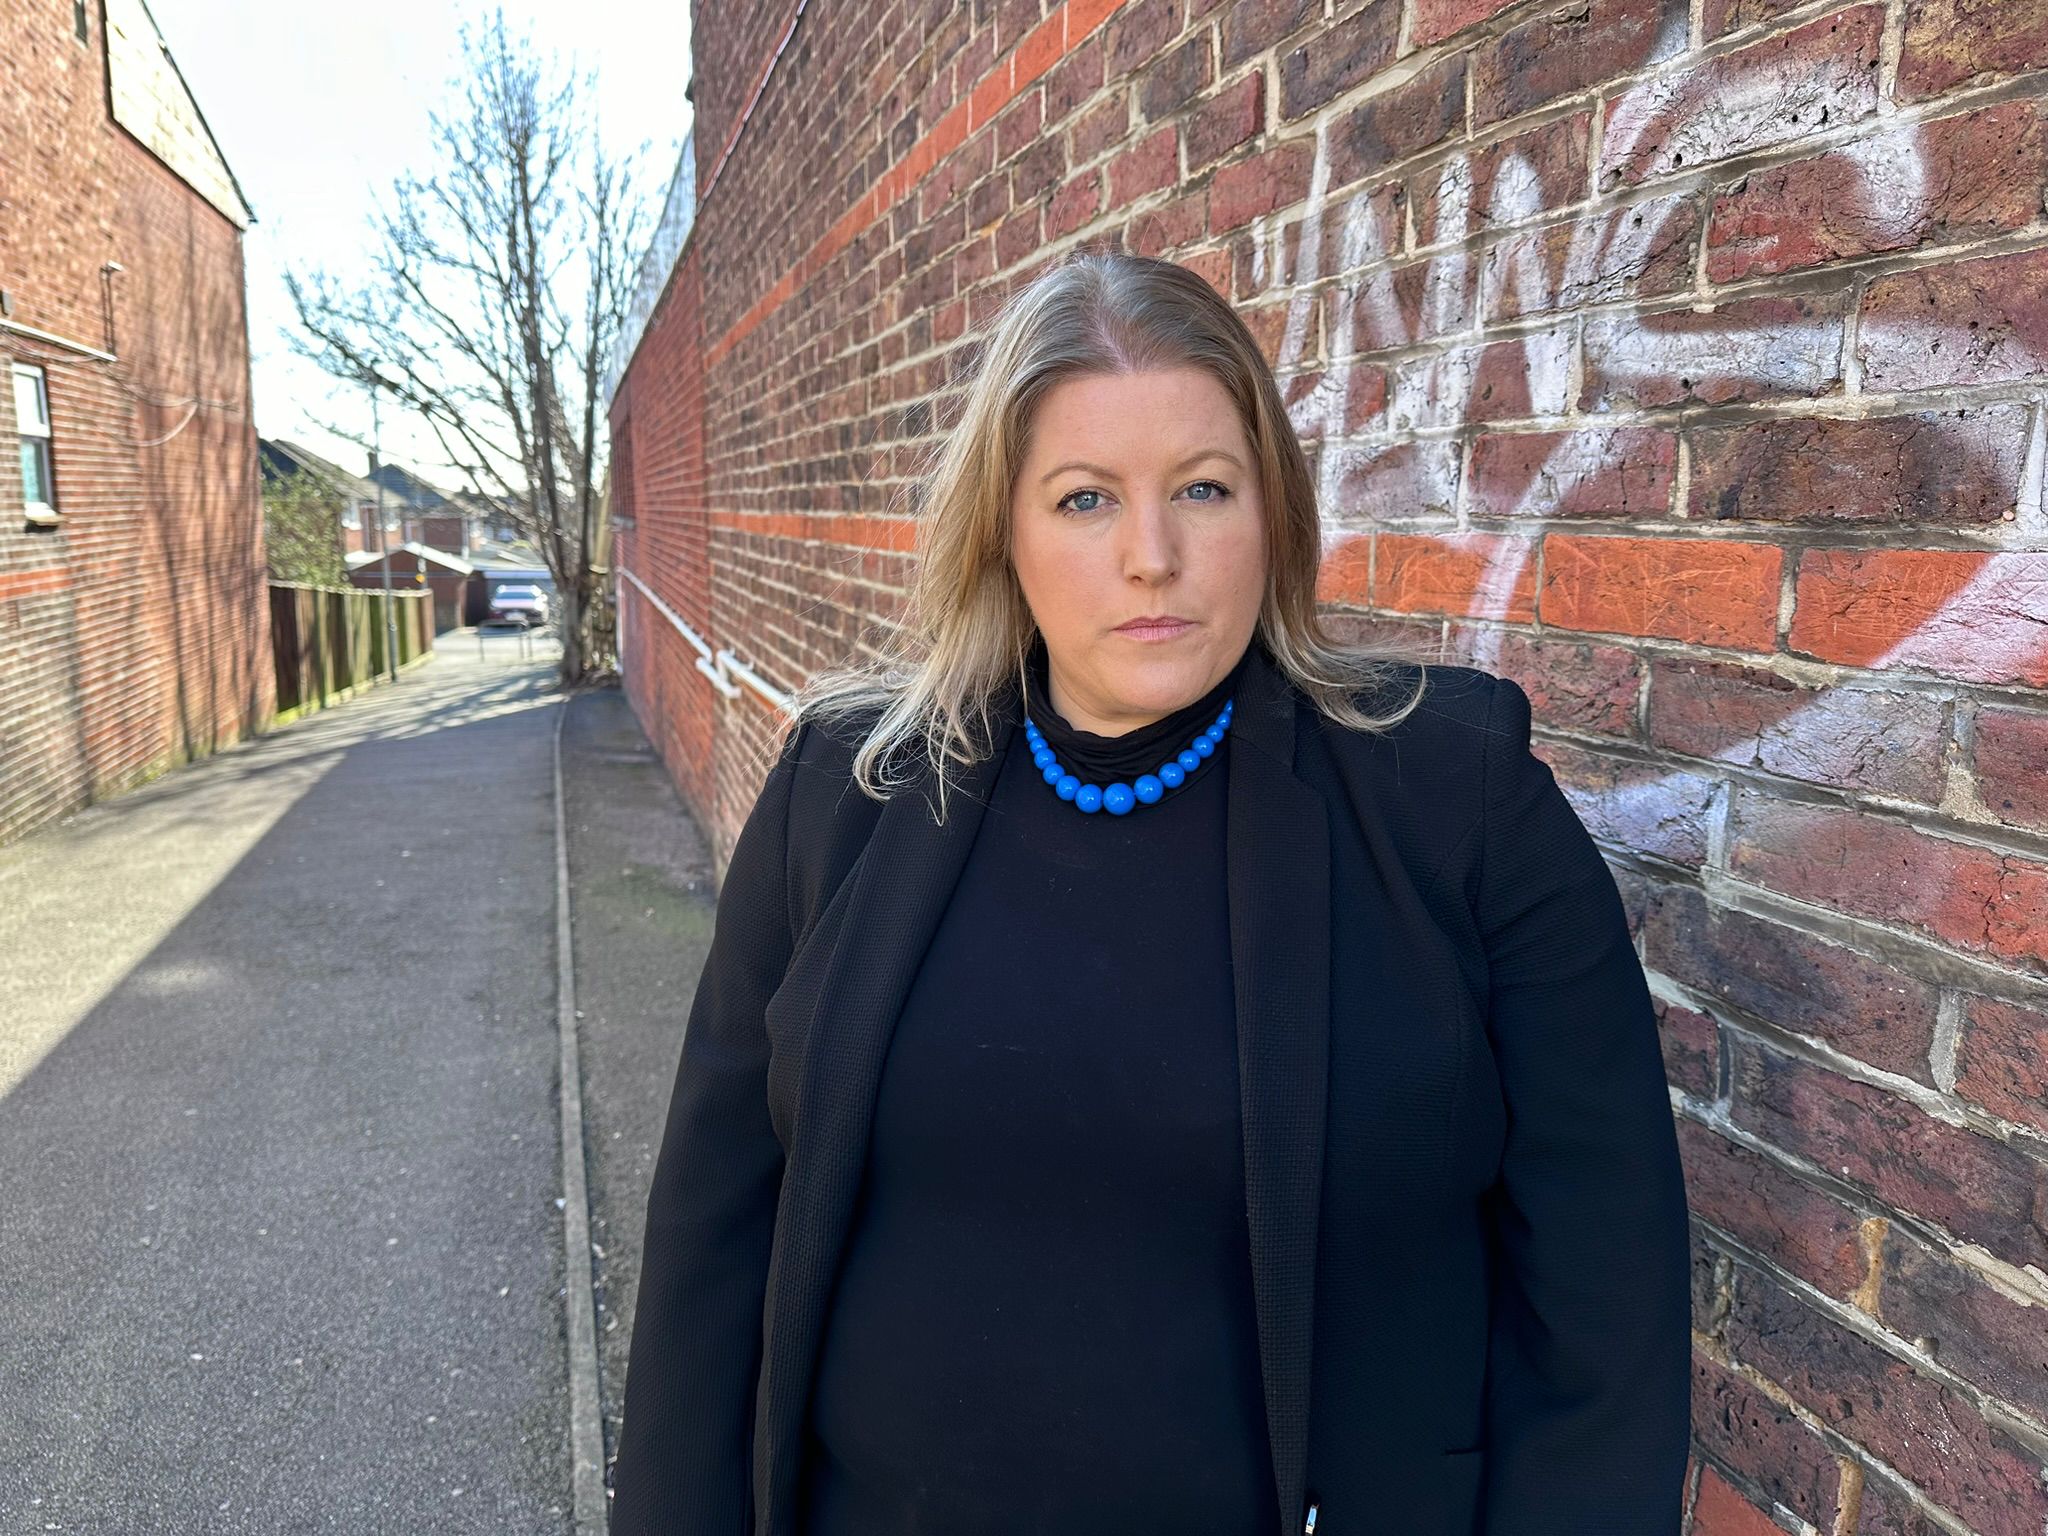 PCC Donna Jones standing next to a graffiti wall wearing black clothing and a blue necklace